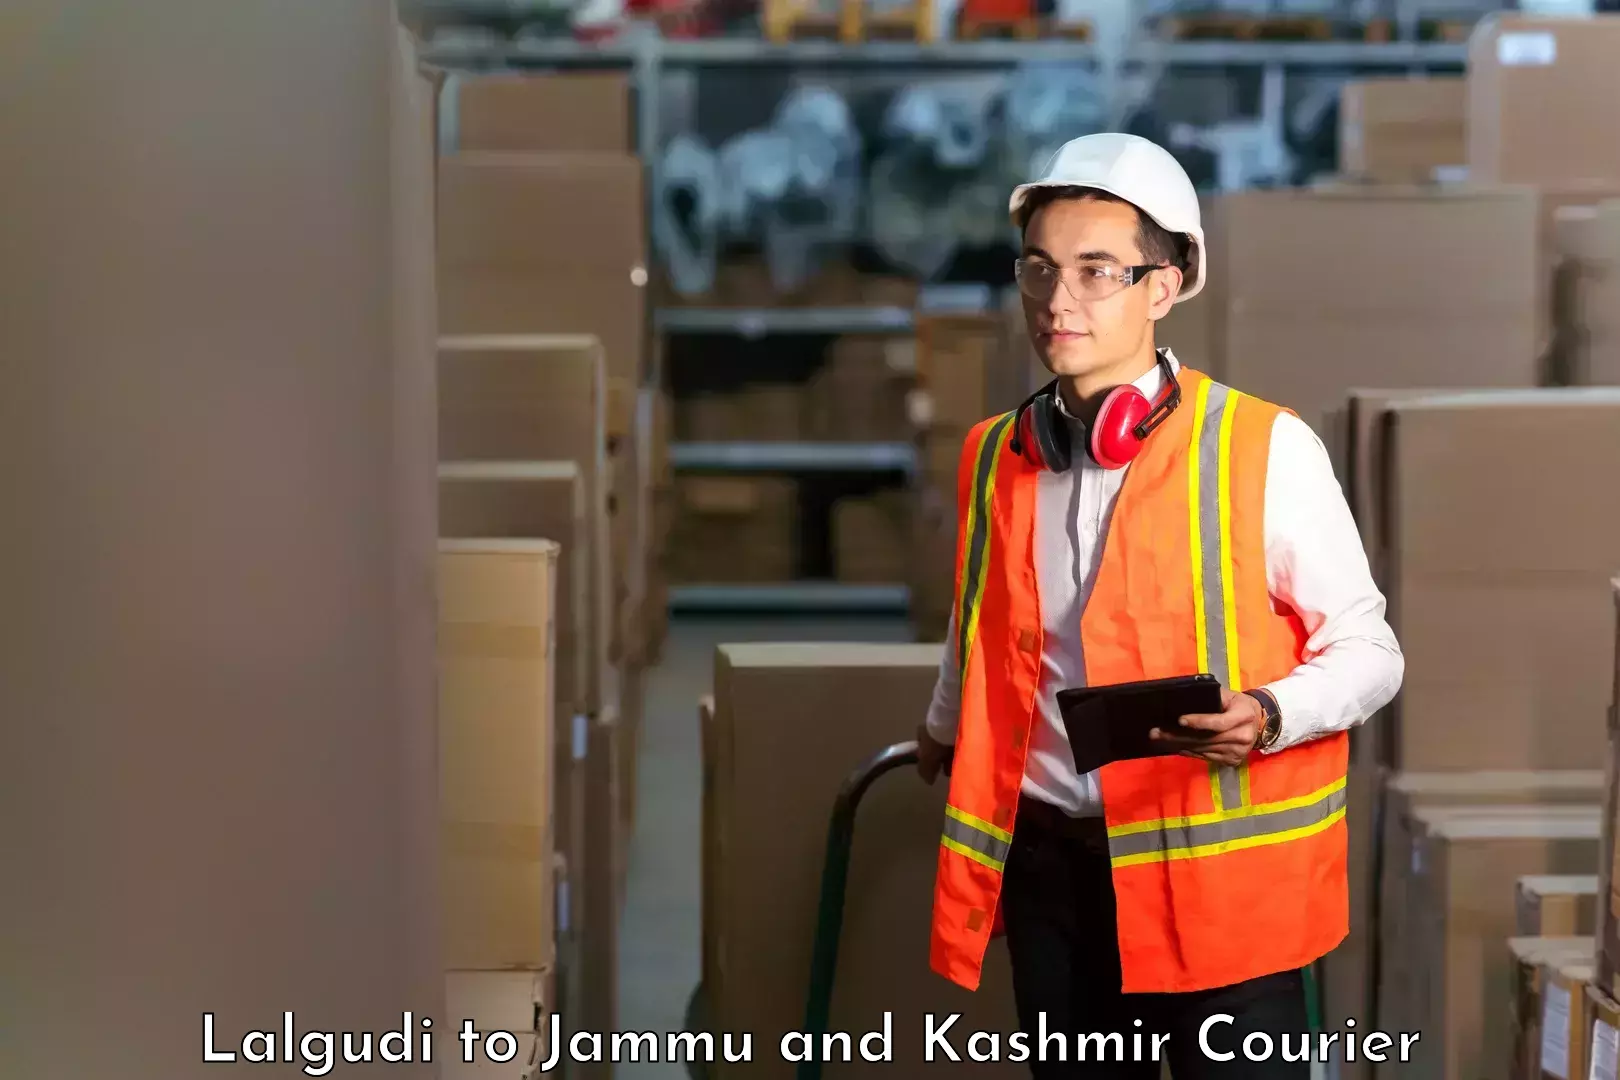 State-of-the-art courier technology Lalgudi to IIT Jammu